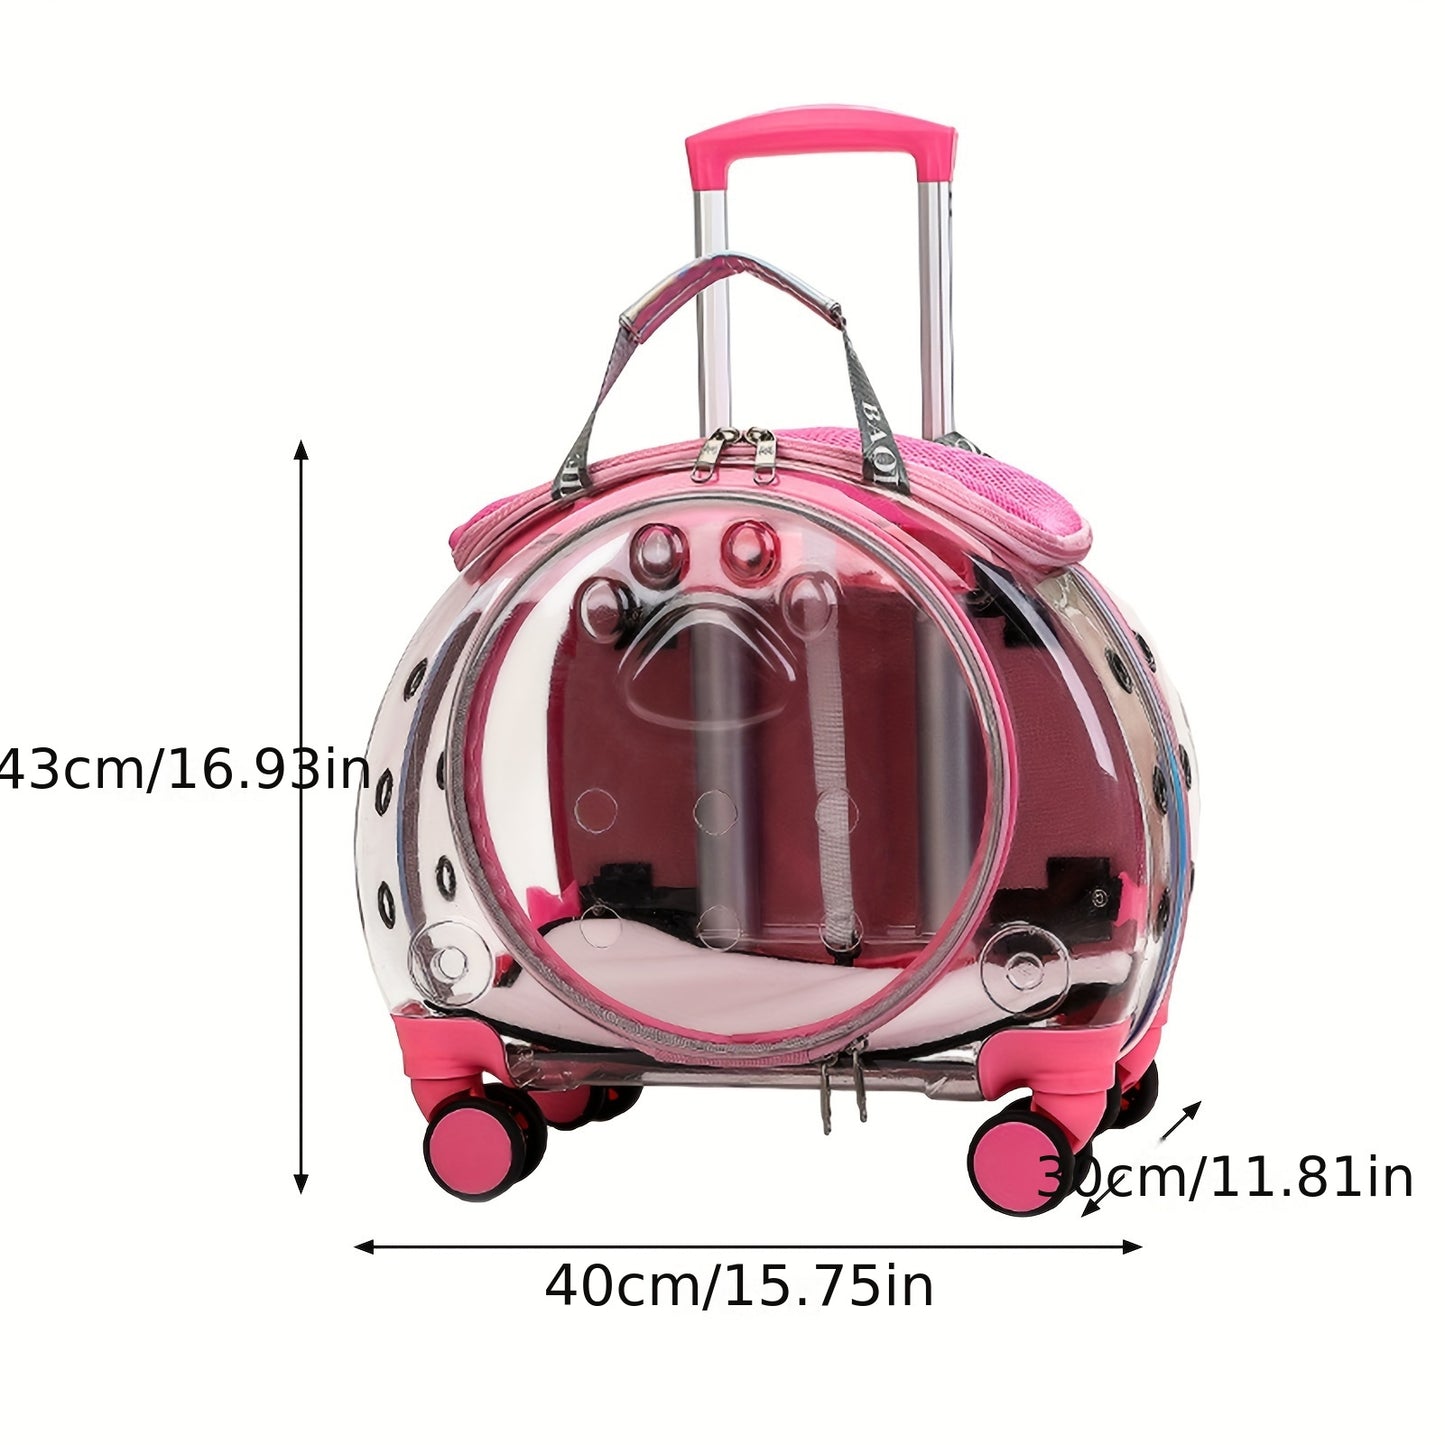 Pet Trolley Case Clear Ventilation Holes Silent Wheels Convenient Portable Cats Dogs Backpack for Travel